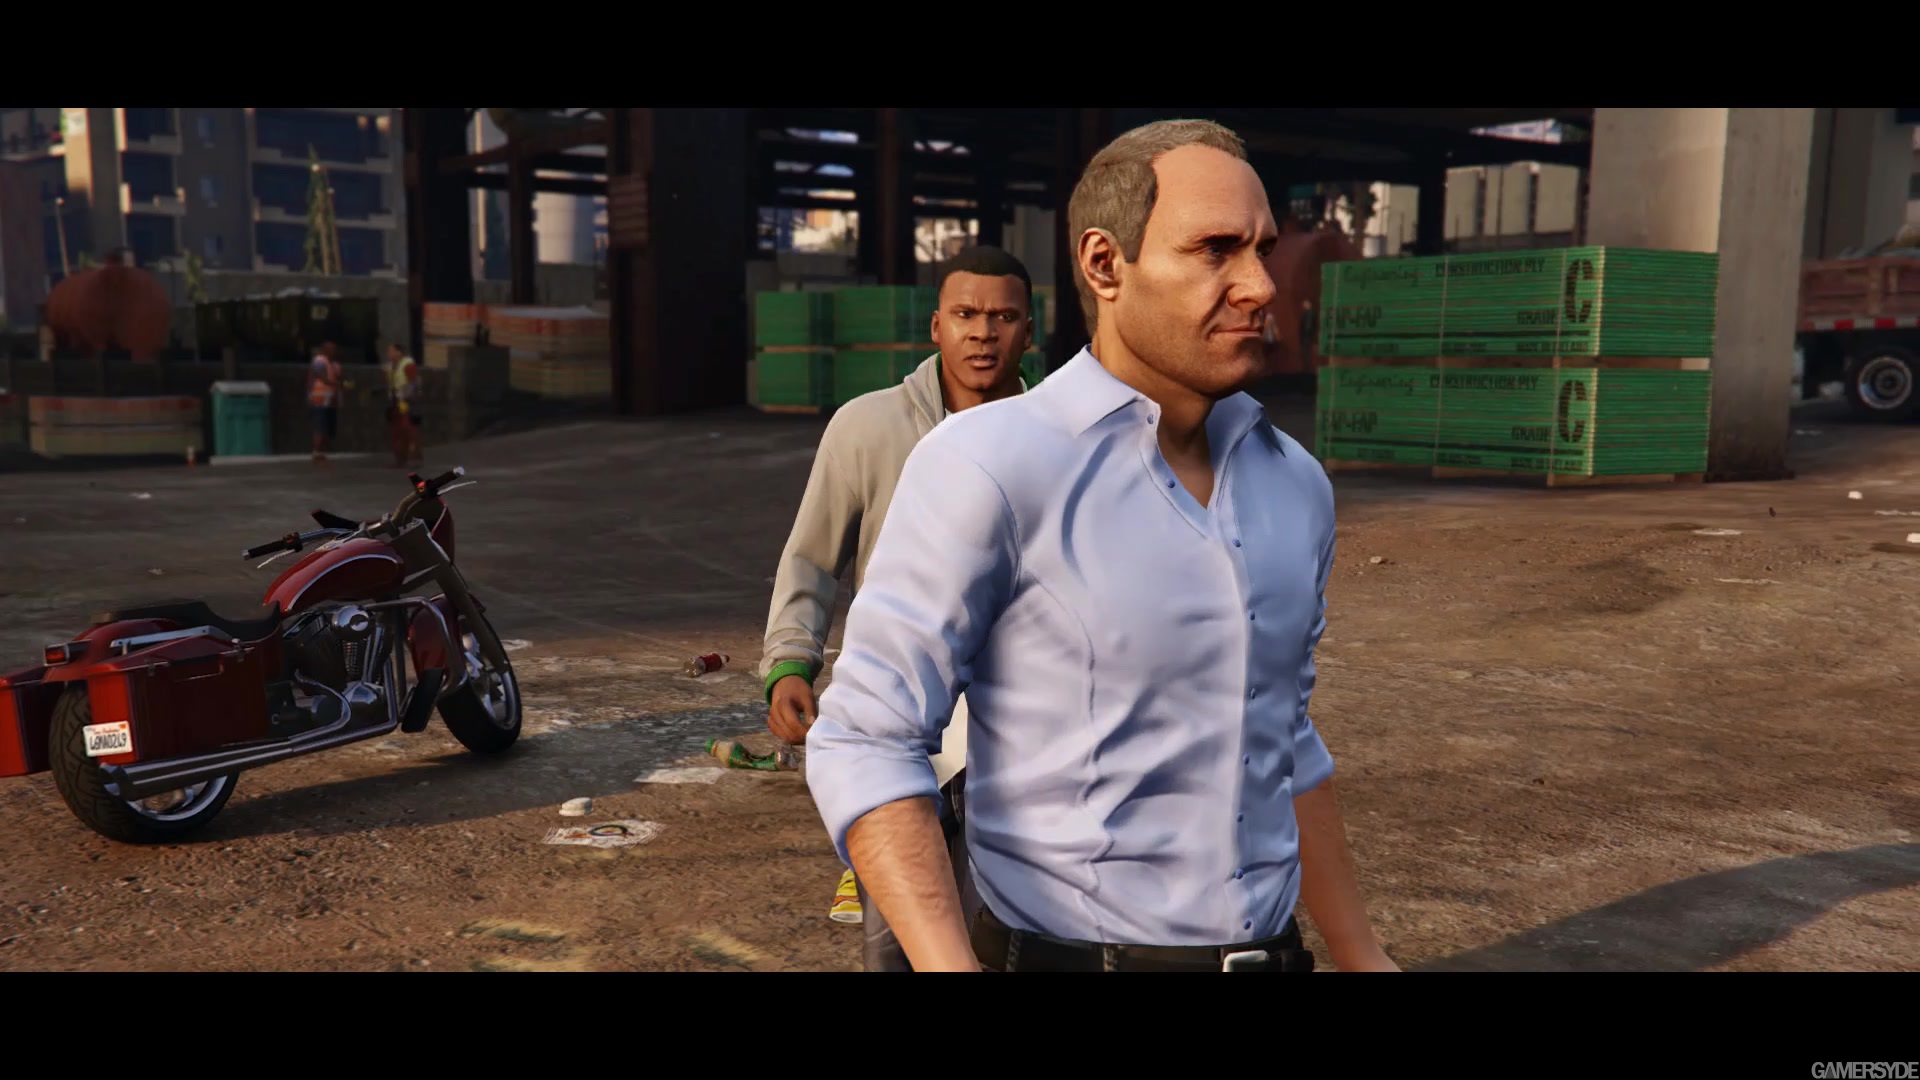 Grand Theft Auto V  Launch trailer  High quality stream and download